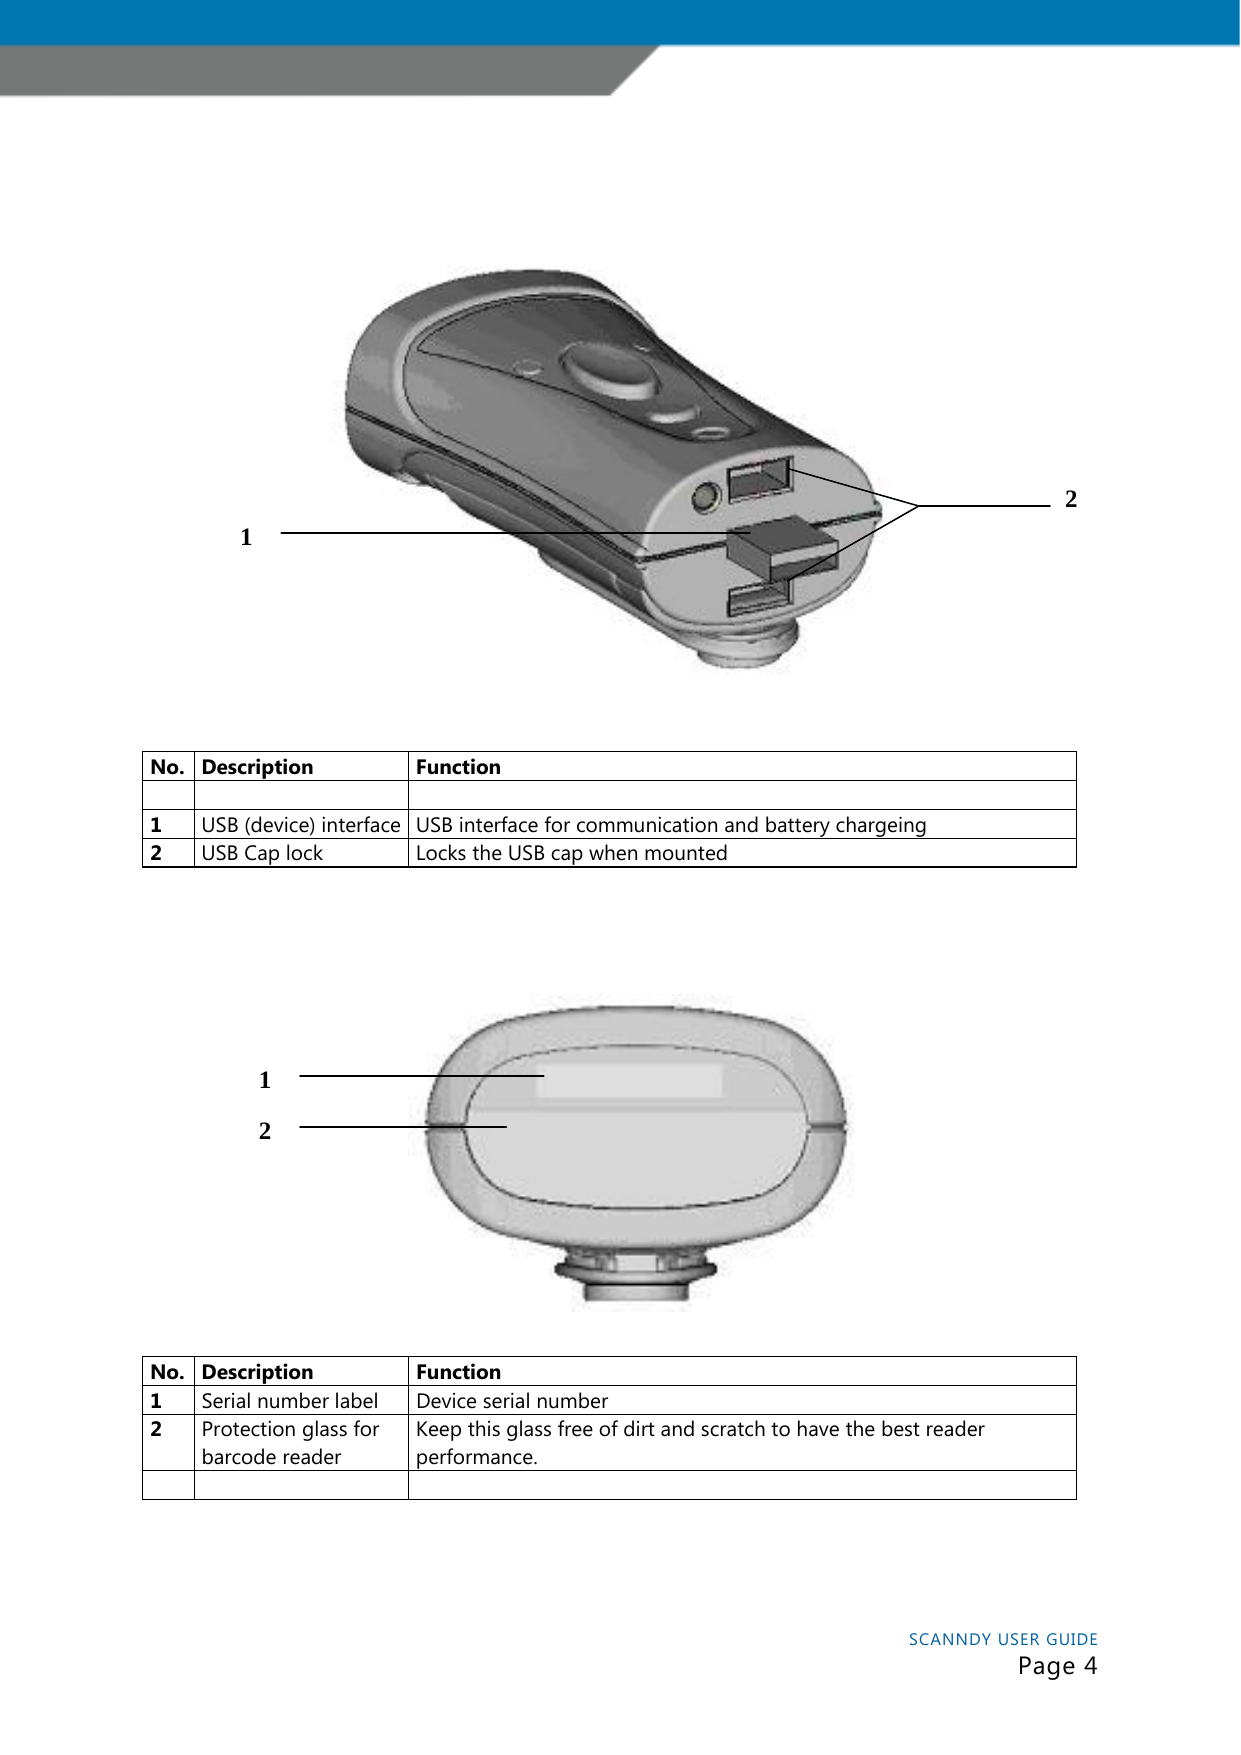  SCANNDY USER GUIDE Page 4                      No. Description   Function    1  USB (device) interface  USB interface for communication and battery chargeing 2  USB Cap lock  Locks the USB cap when mounted                  No.   Description   Function 1  Serial number label  Device serial number  2  Protection glass for barcode reader Keep this glass free of dirt and scratch to have the best reader performance.           1 2 2 1 